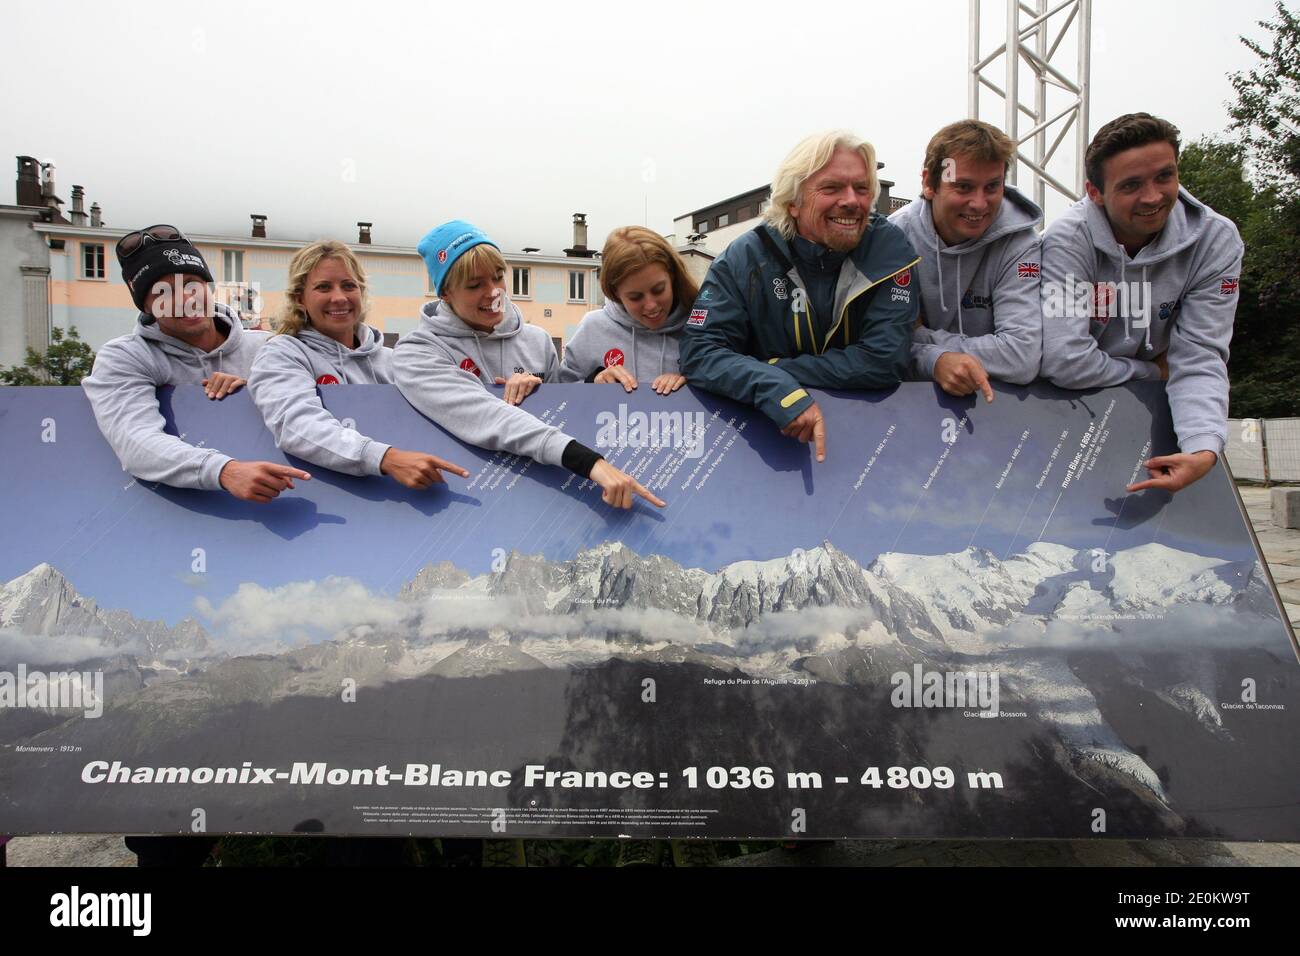 Virgin Group founder and CEO Sir Richard Branson (3rd R) poses alongside the team of The Big Change Charitable Trust, (L-R) Sam Branson, Holly Branson, Sam's fiancee Isabella Calthorpe, Princess Beatrice of York, Sam Richardson and Phil Nevin, in Chamonix, French Alps on September 3, 2012. Sir Richard joined the team in their attempt to climb Western Europe's highest mountain, Mont Blanc. Founded by Branson's children Holly and Sam along with their friends, the Trust works in partnership with charitable projects throughout the UK, assisting them in their mission to inspire and encourage young Stock Photo